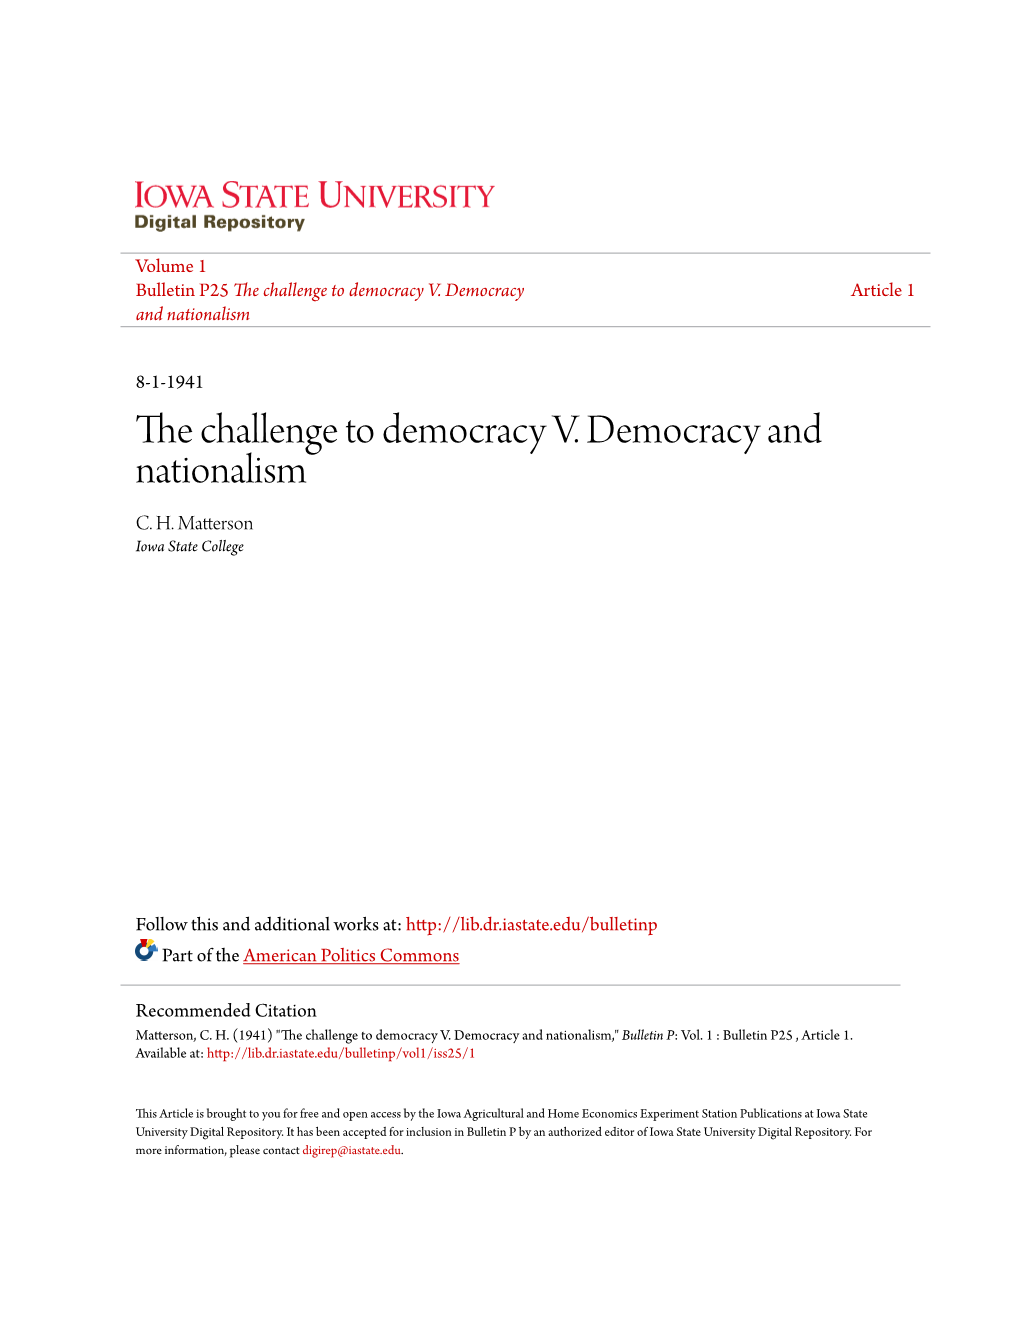 The Challenge to Democracy V. Democracy and Nationalism C